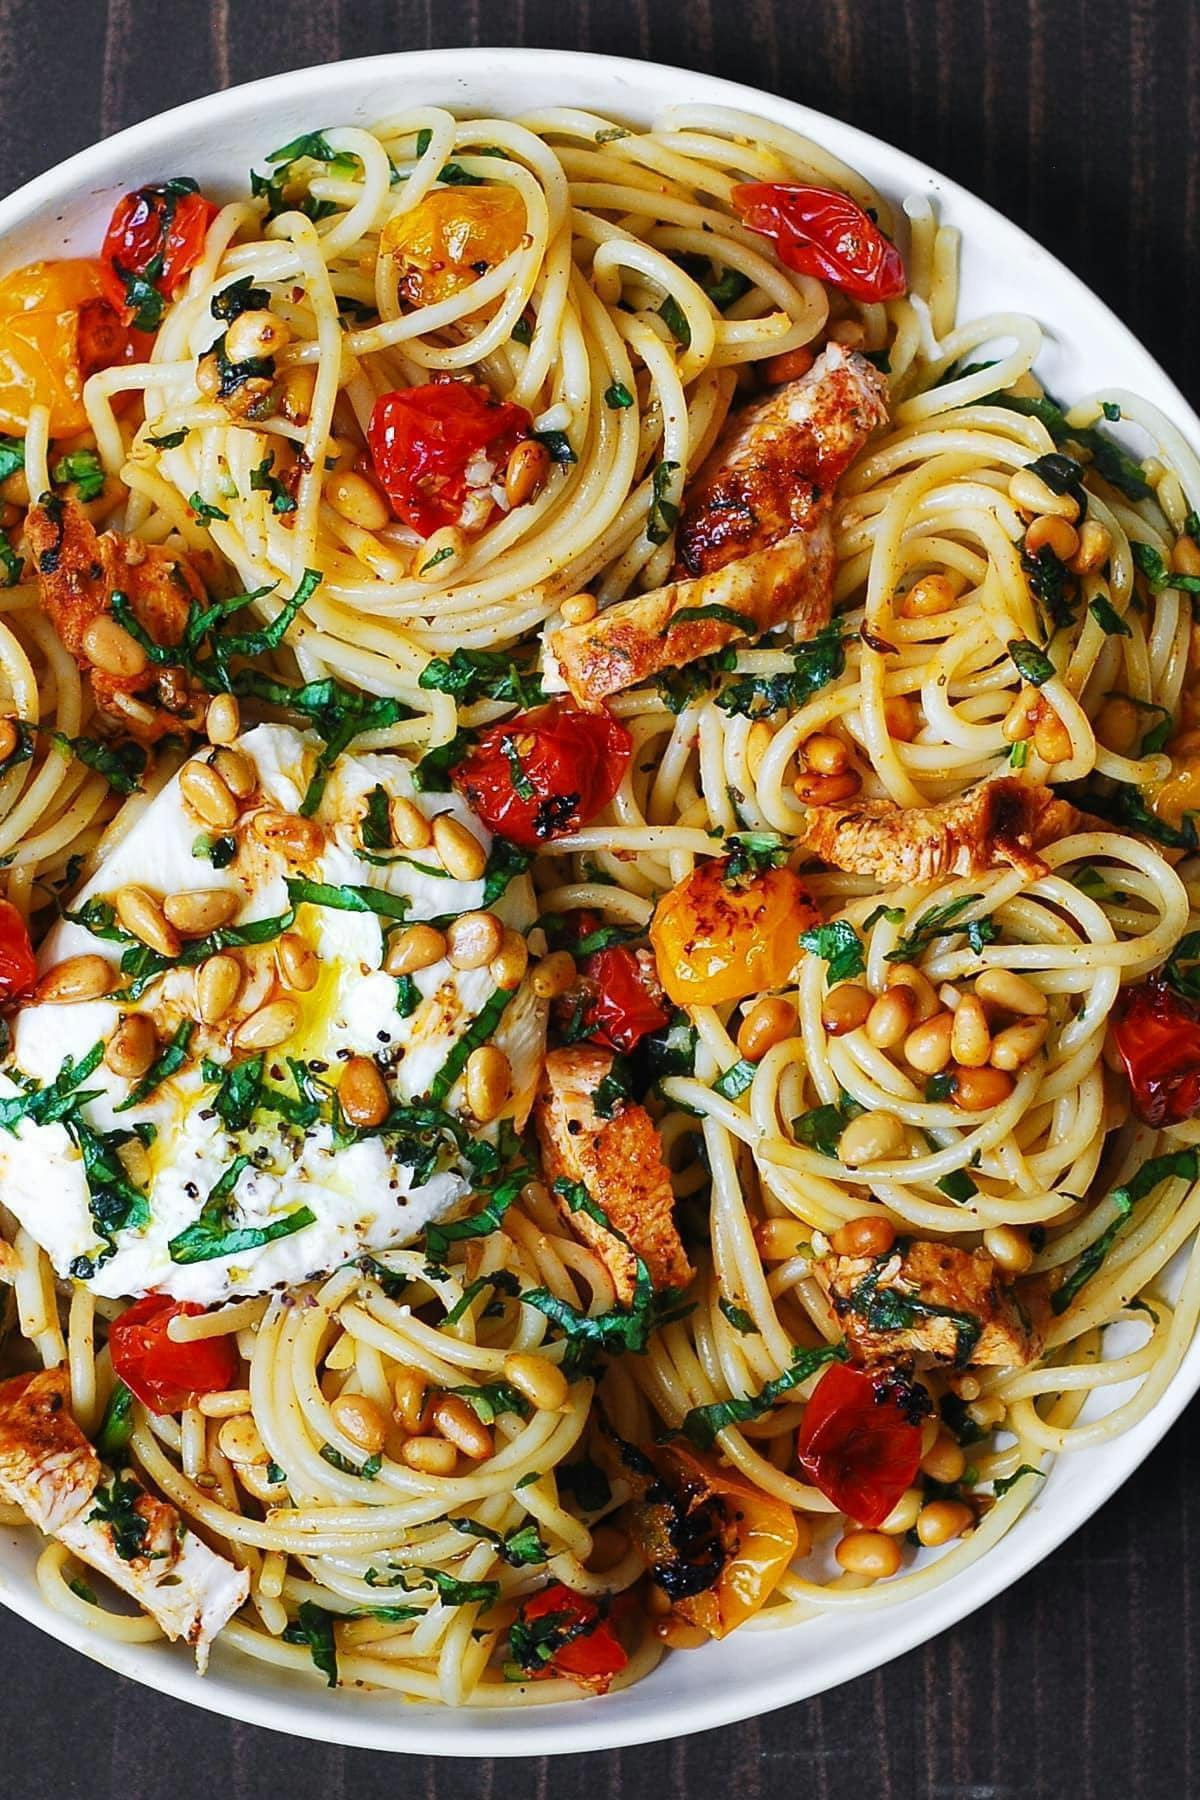 Chicken Spaghetti with Roasted Cherry Tomatoes, Burrata Cheese, Pine Nuts, and Lemon Butter Garlic Sauce.